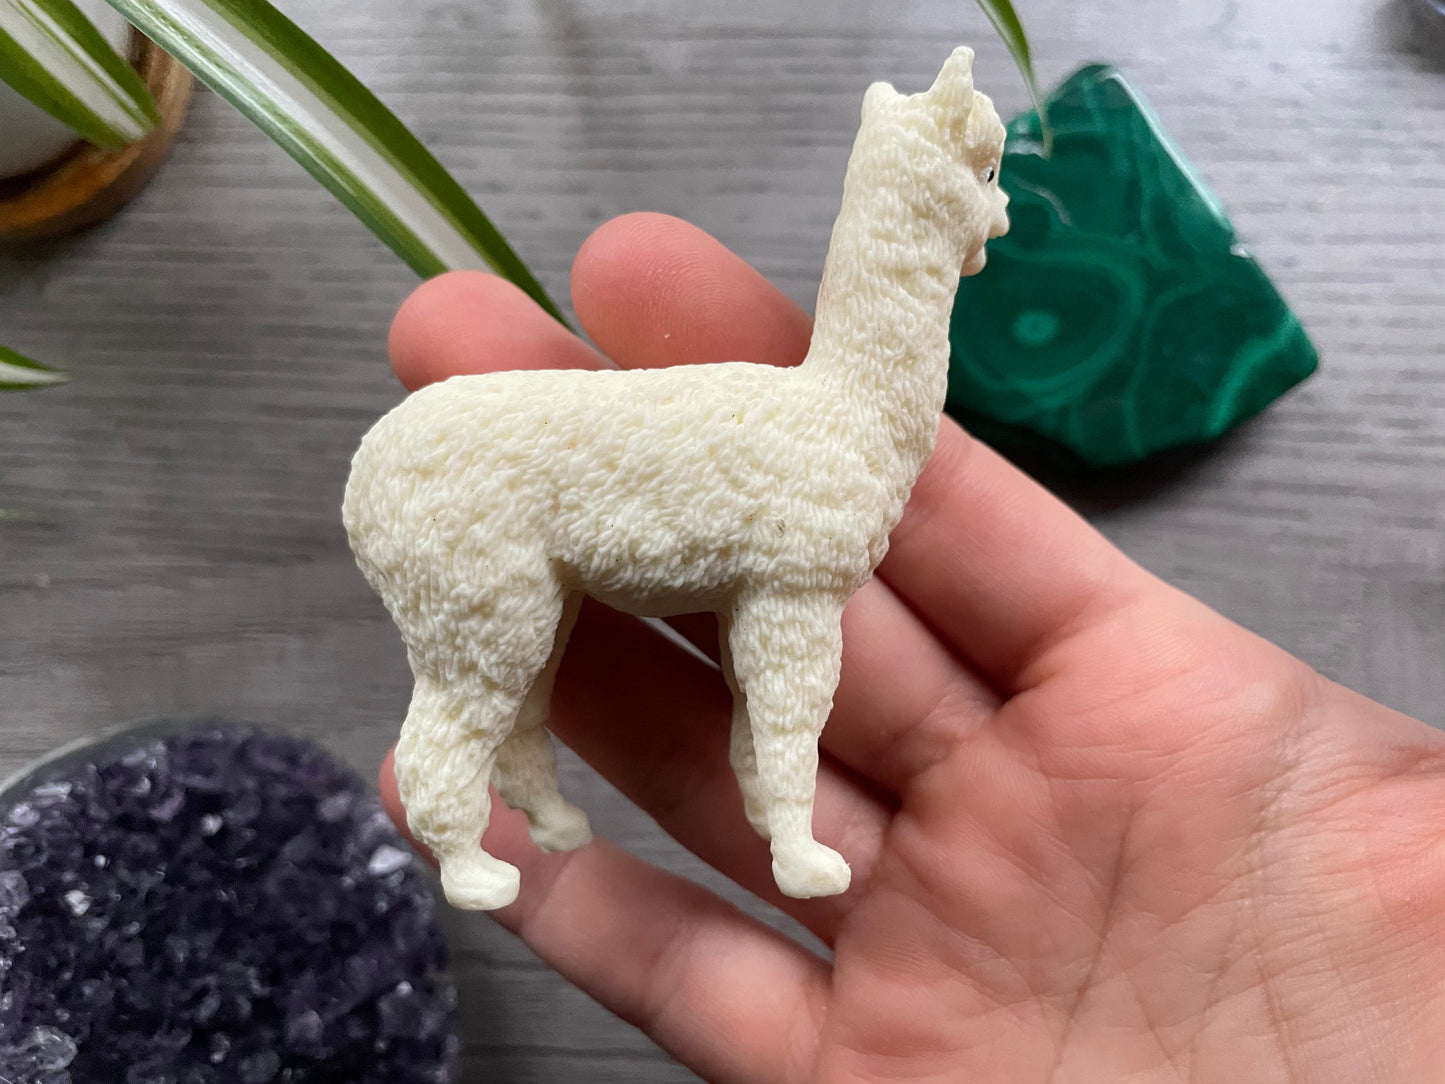 Pictured is an alpaca or llama carved out of tagua nut.